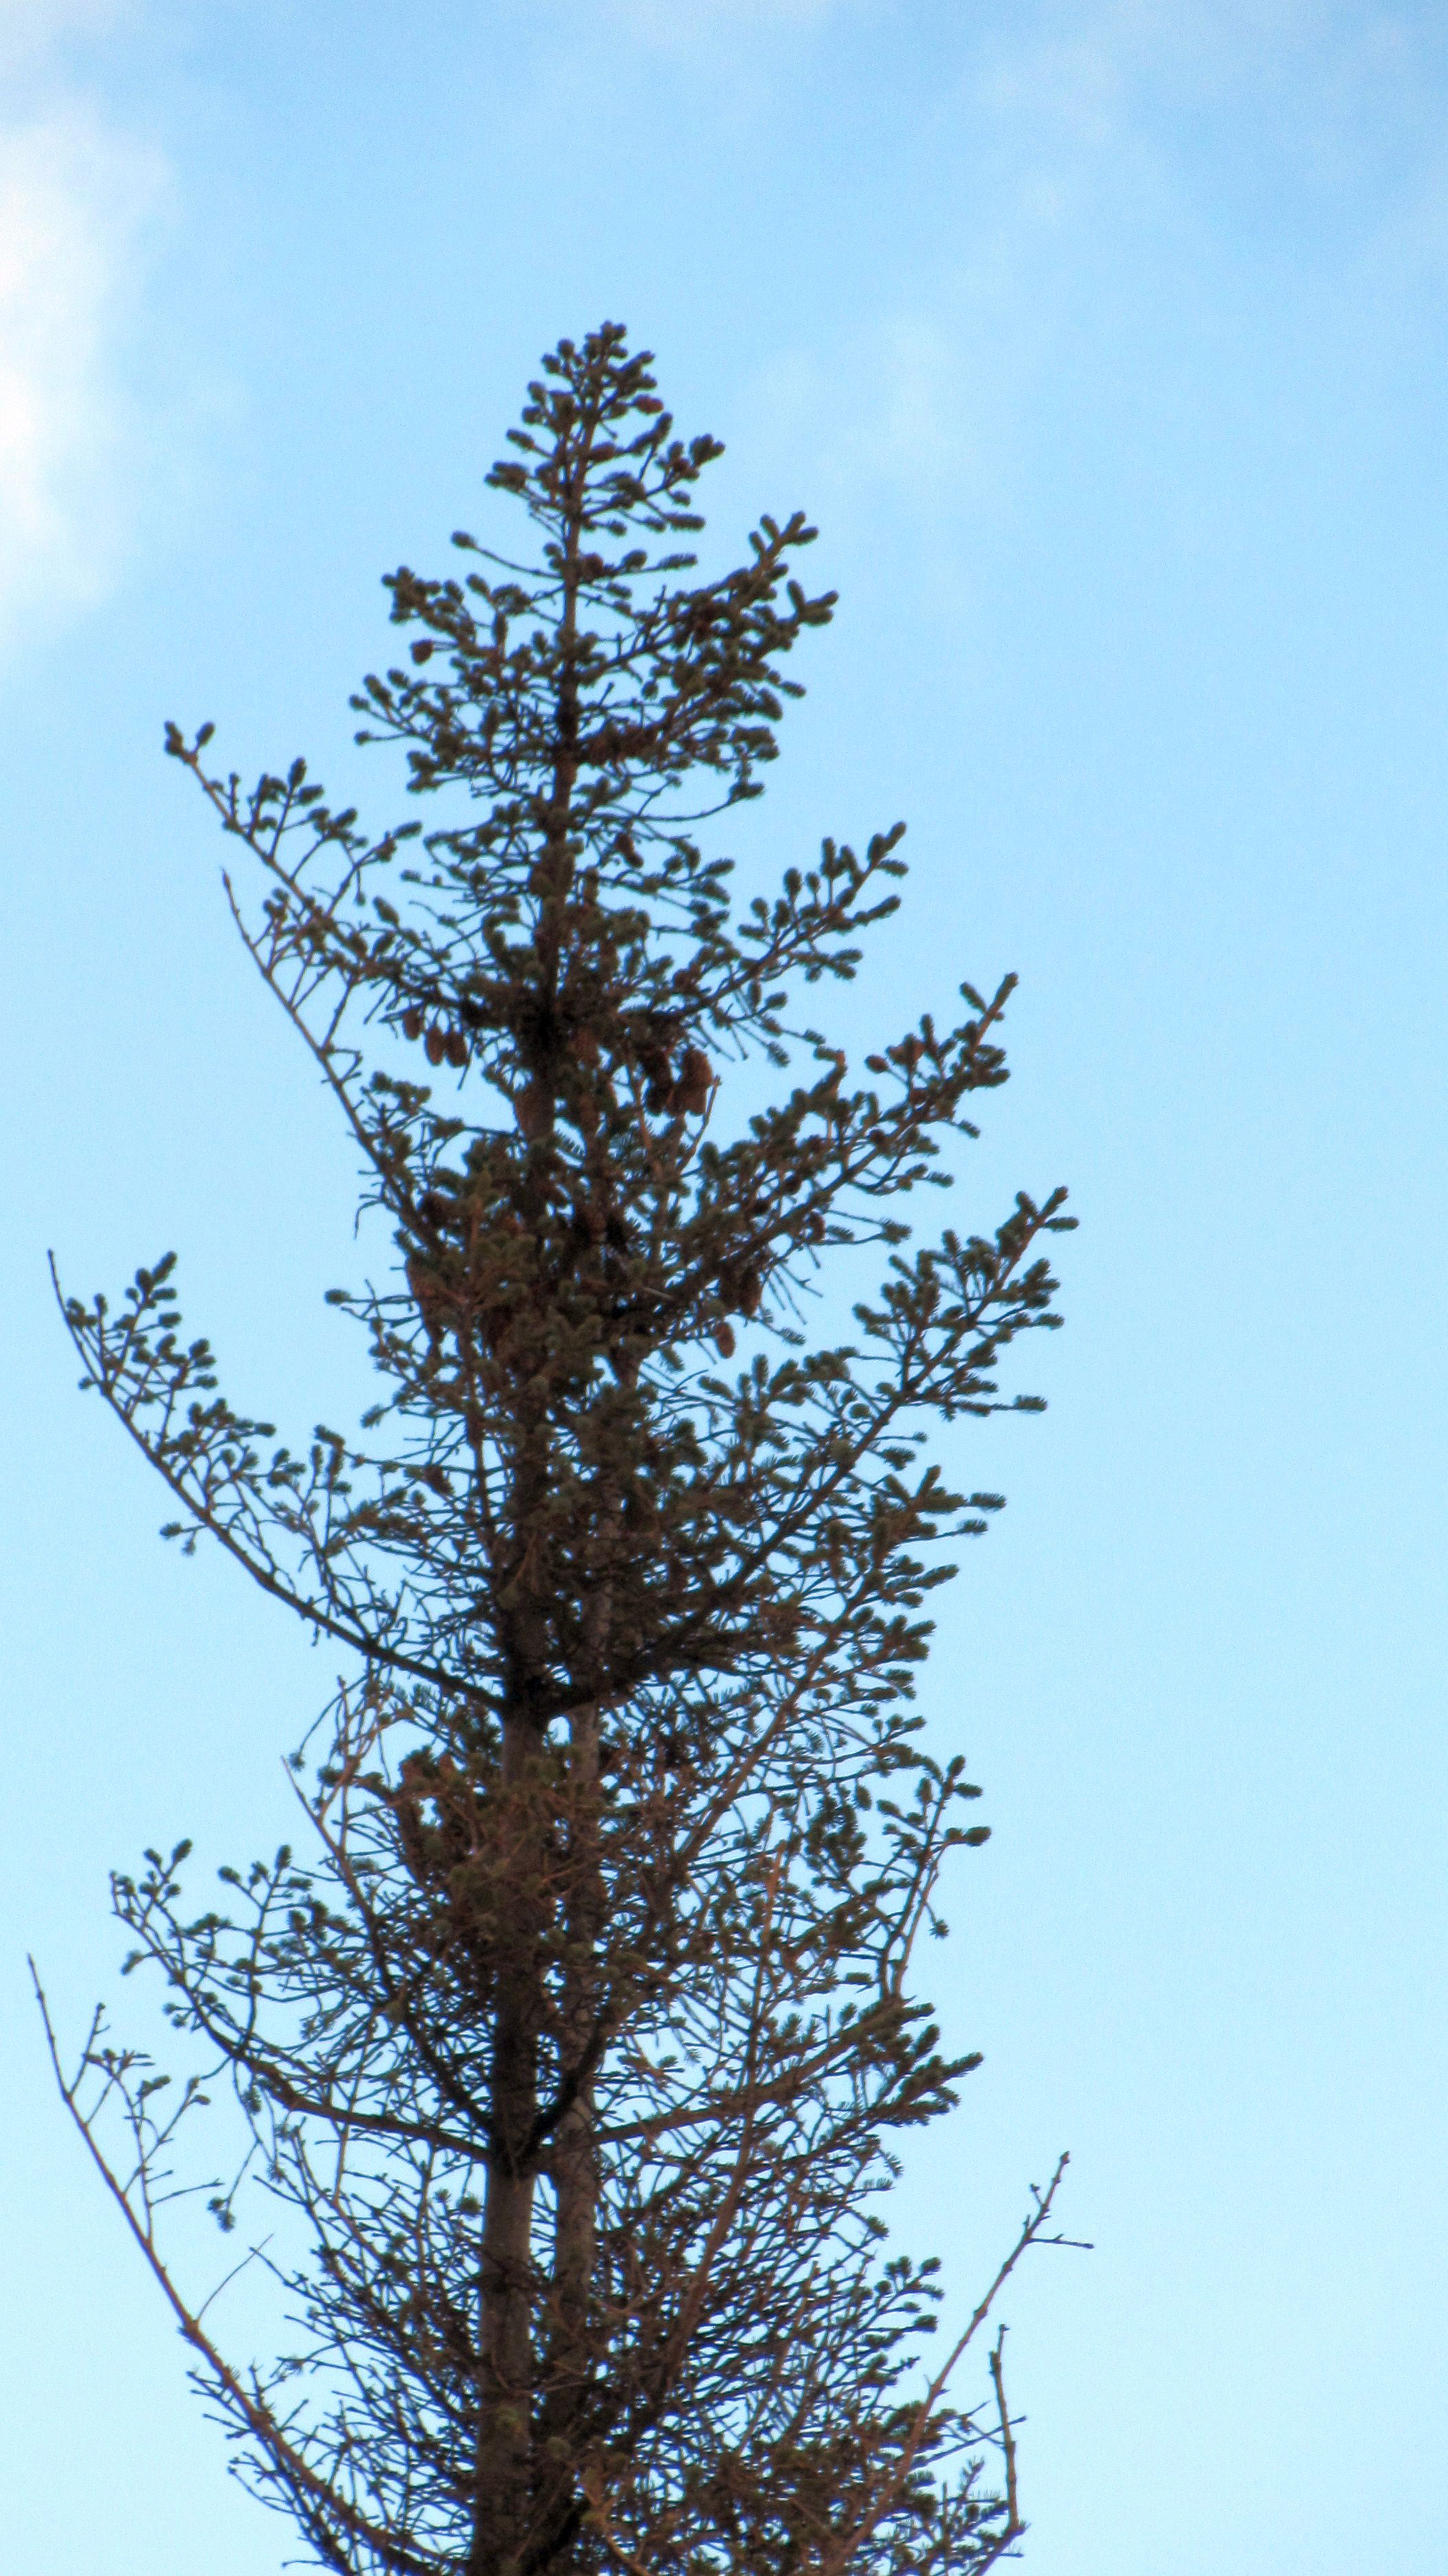 Photos by John Winters, Alaska Division of Forestry. A spruce tree damaged by spruce aphids shows the loss of needles that results.